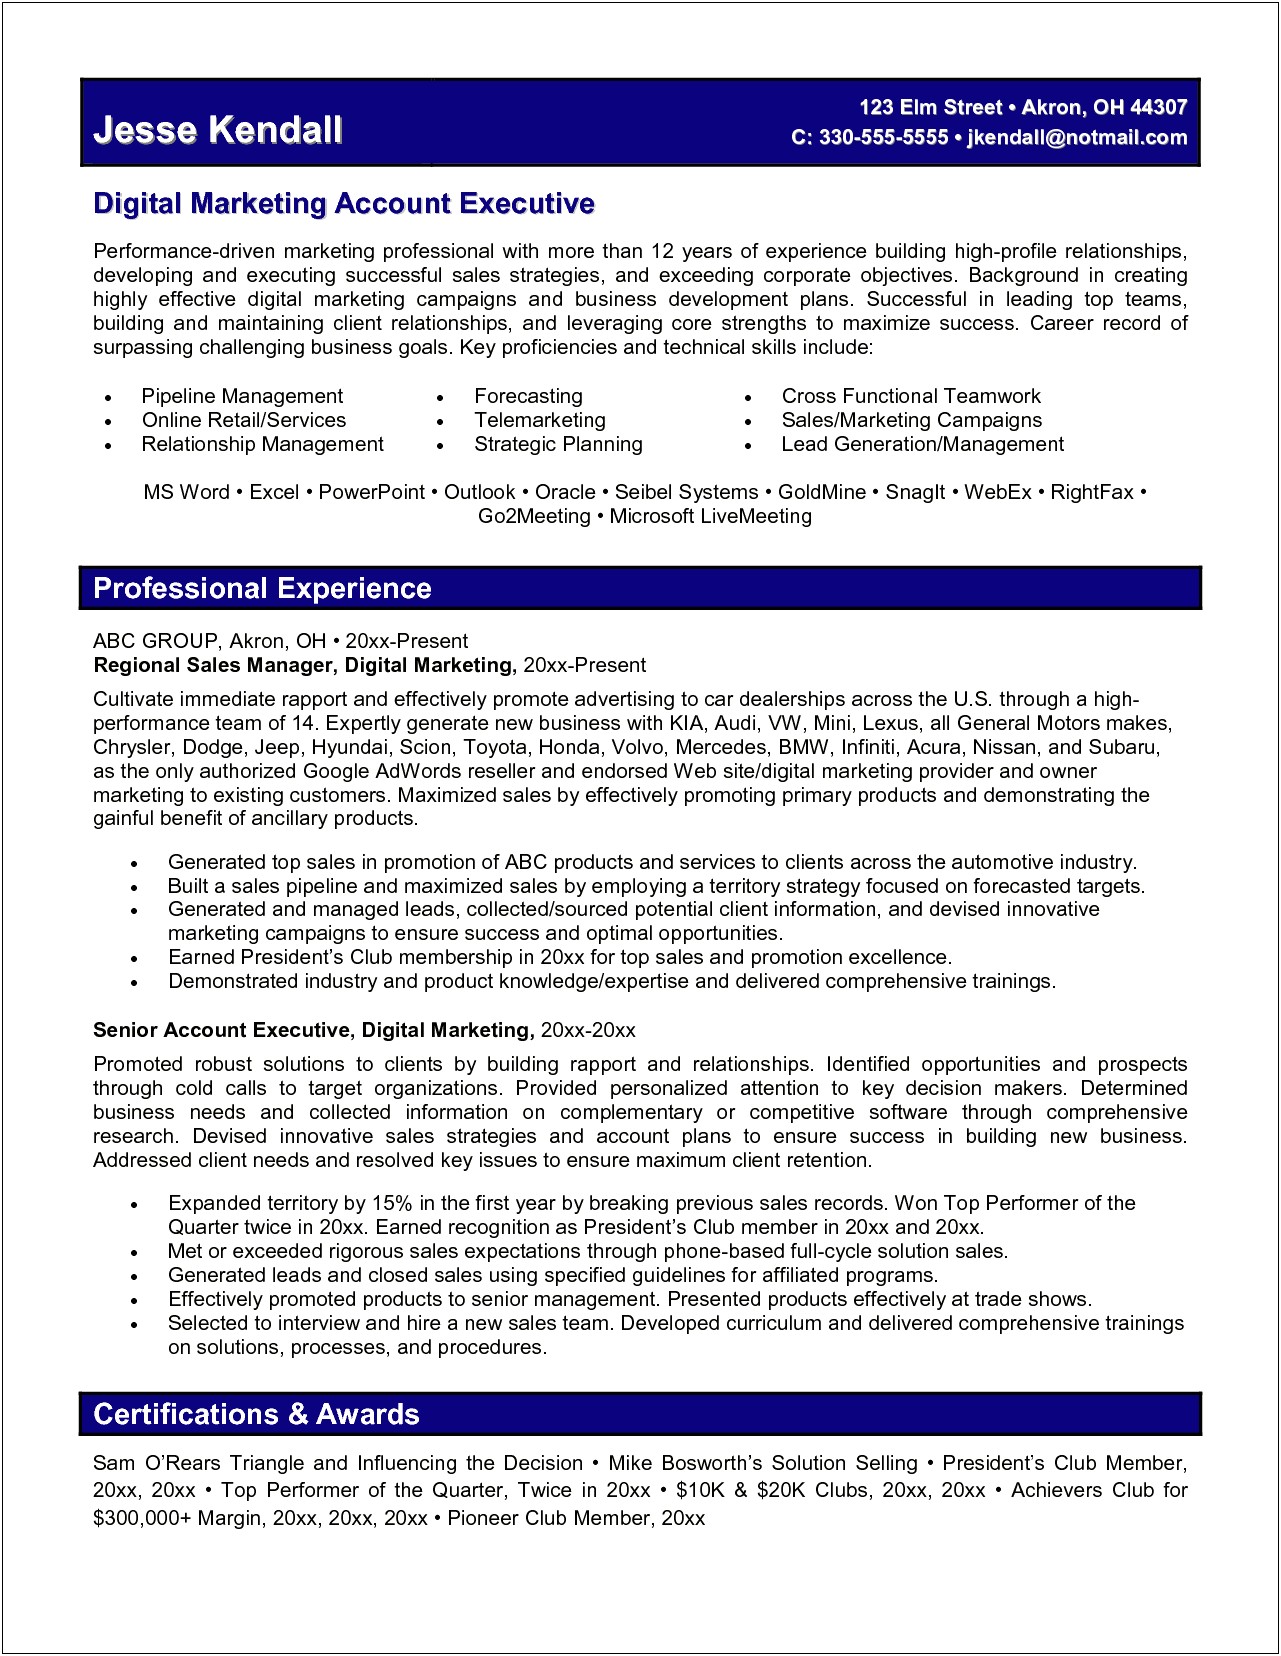 The Best Marketing Executive Resume Ever